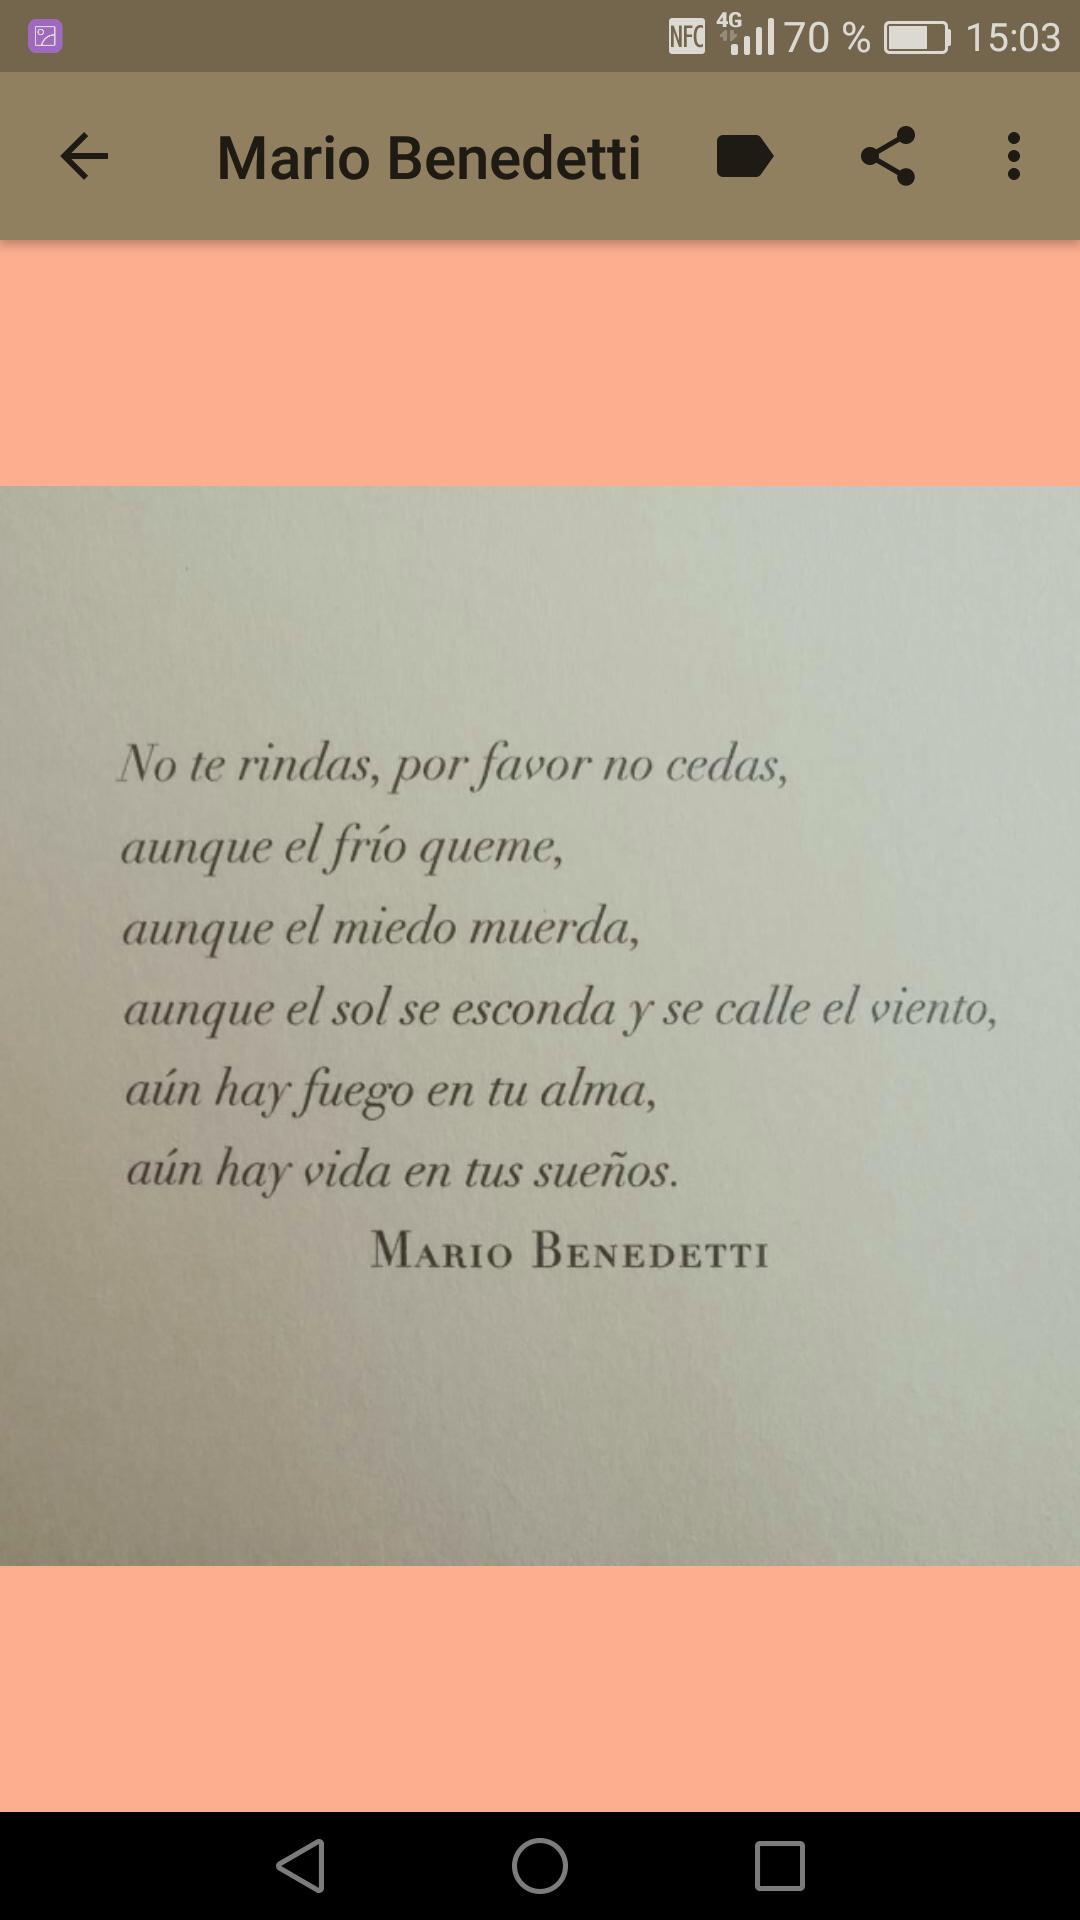 Frases De Mario Benedetti For Android Apk Download